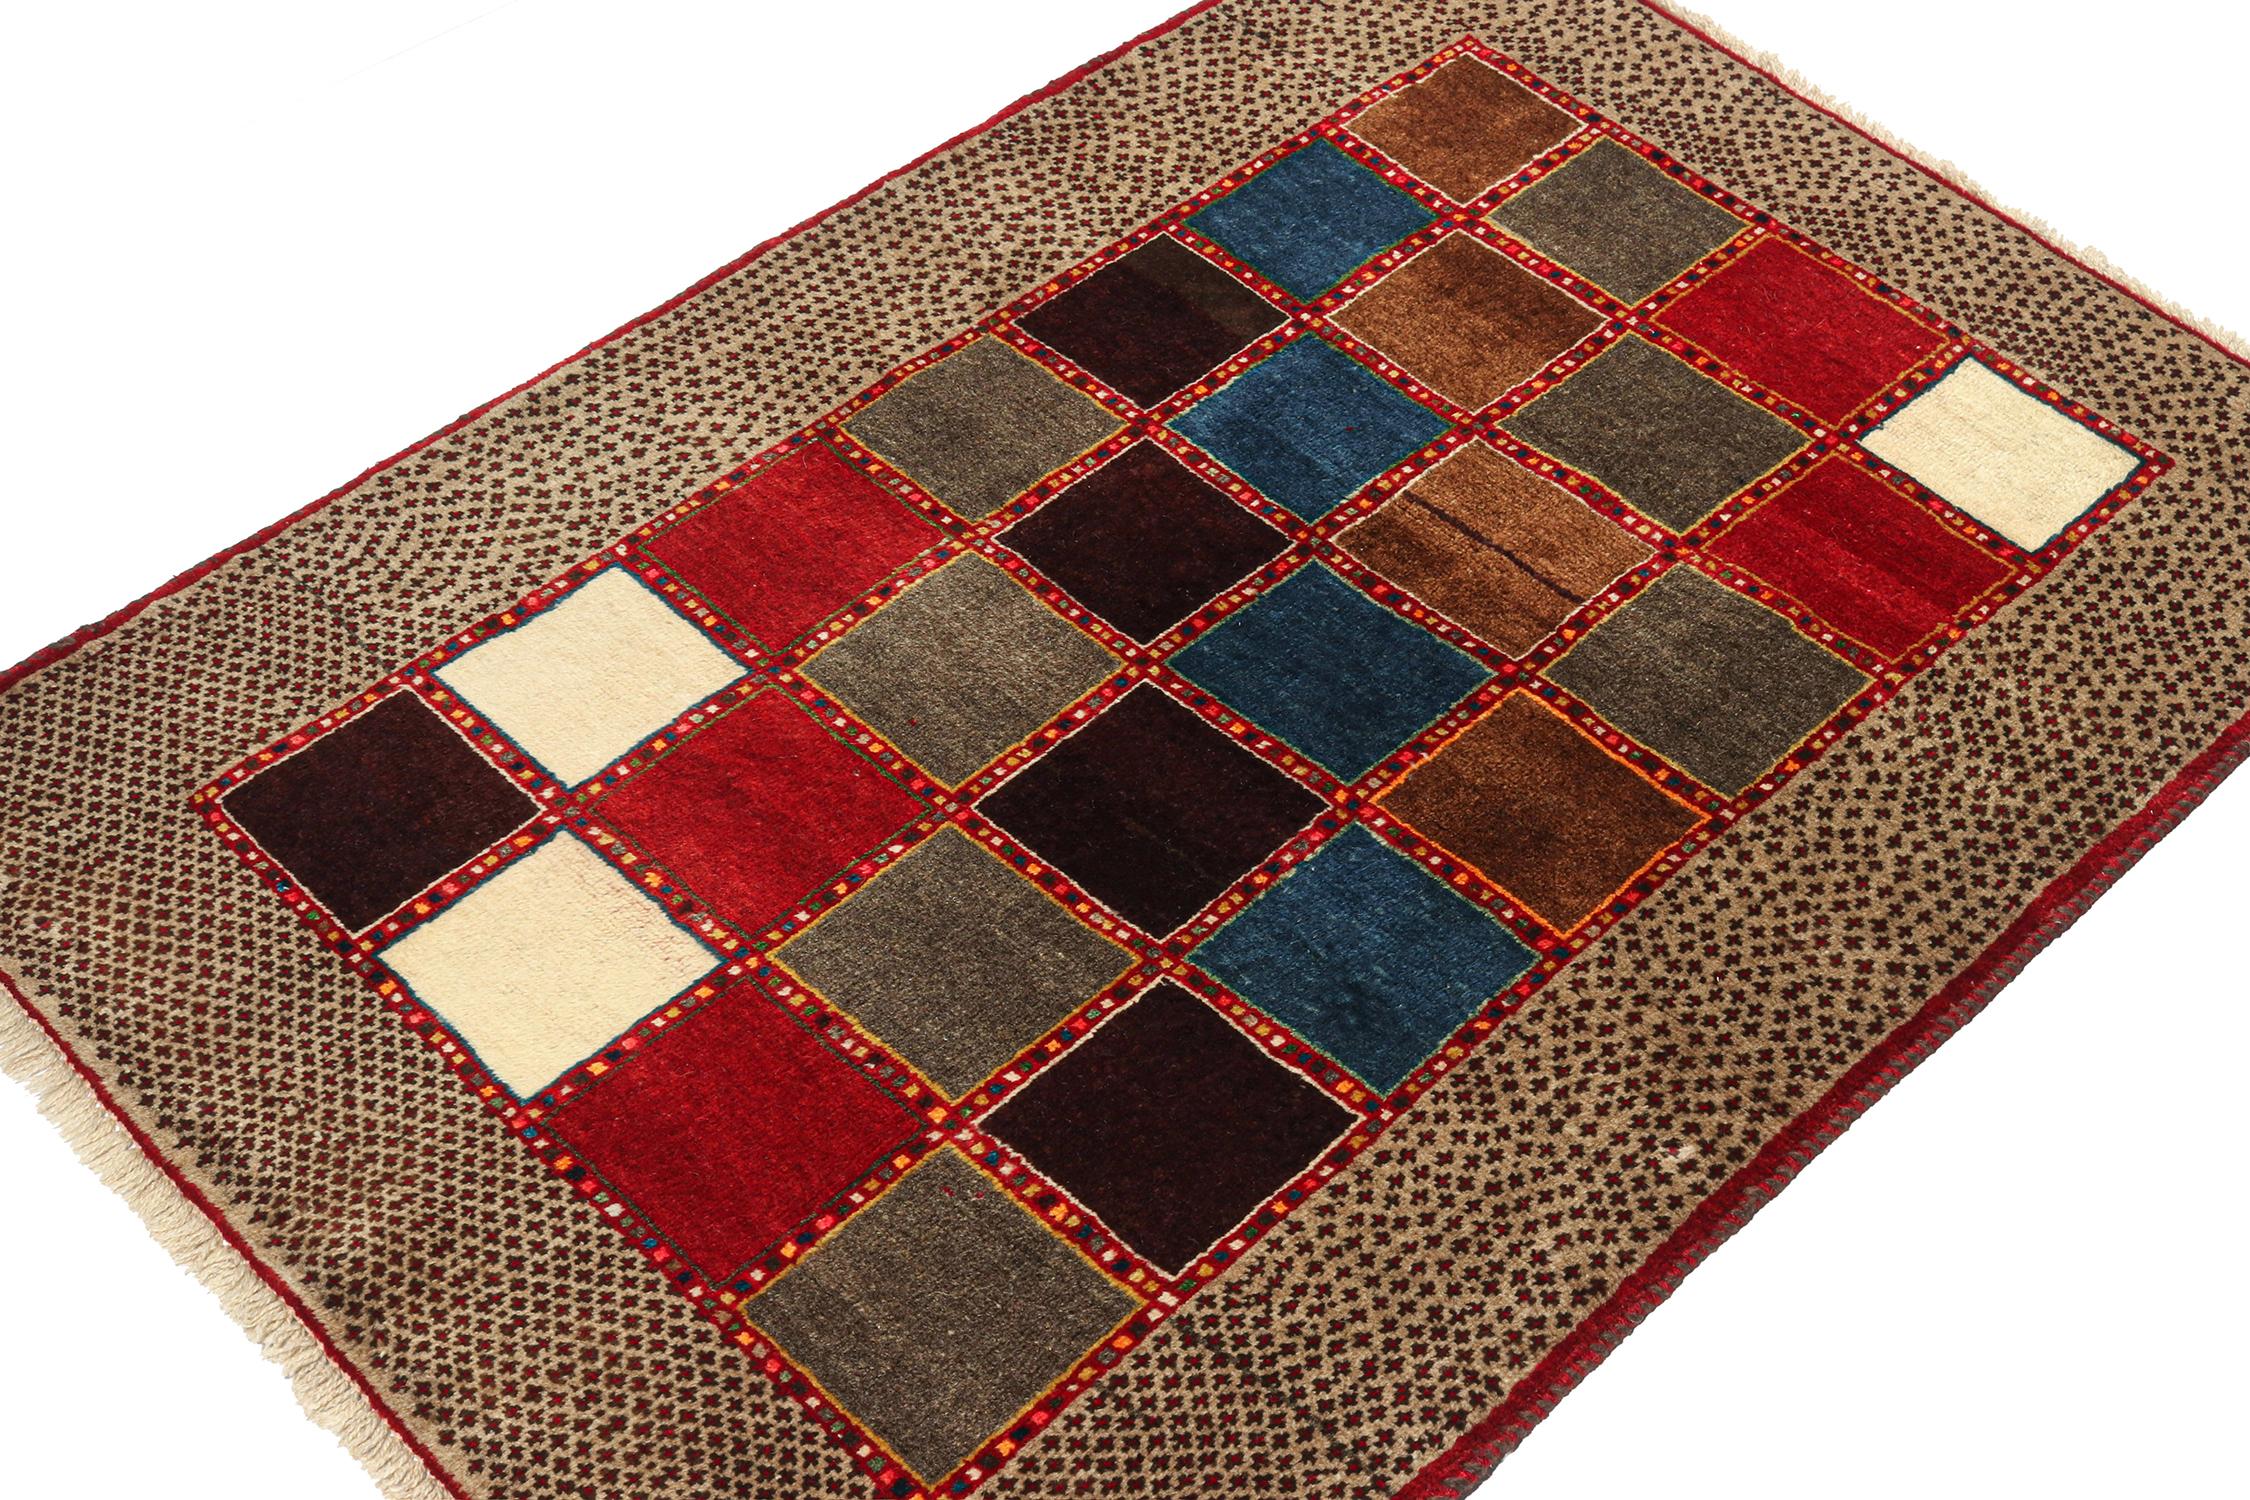 This vintage 3x5 Persian Gabbeh rug makes a splendid entry to Rug & Kilim’s curation of rare tribal pieces. Hand-knotted in wool circa 1950-1960.

On the Design:

The piece features a playful geometric pattern in a joyful range of beige-brown,